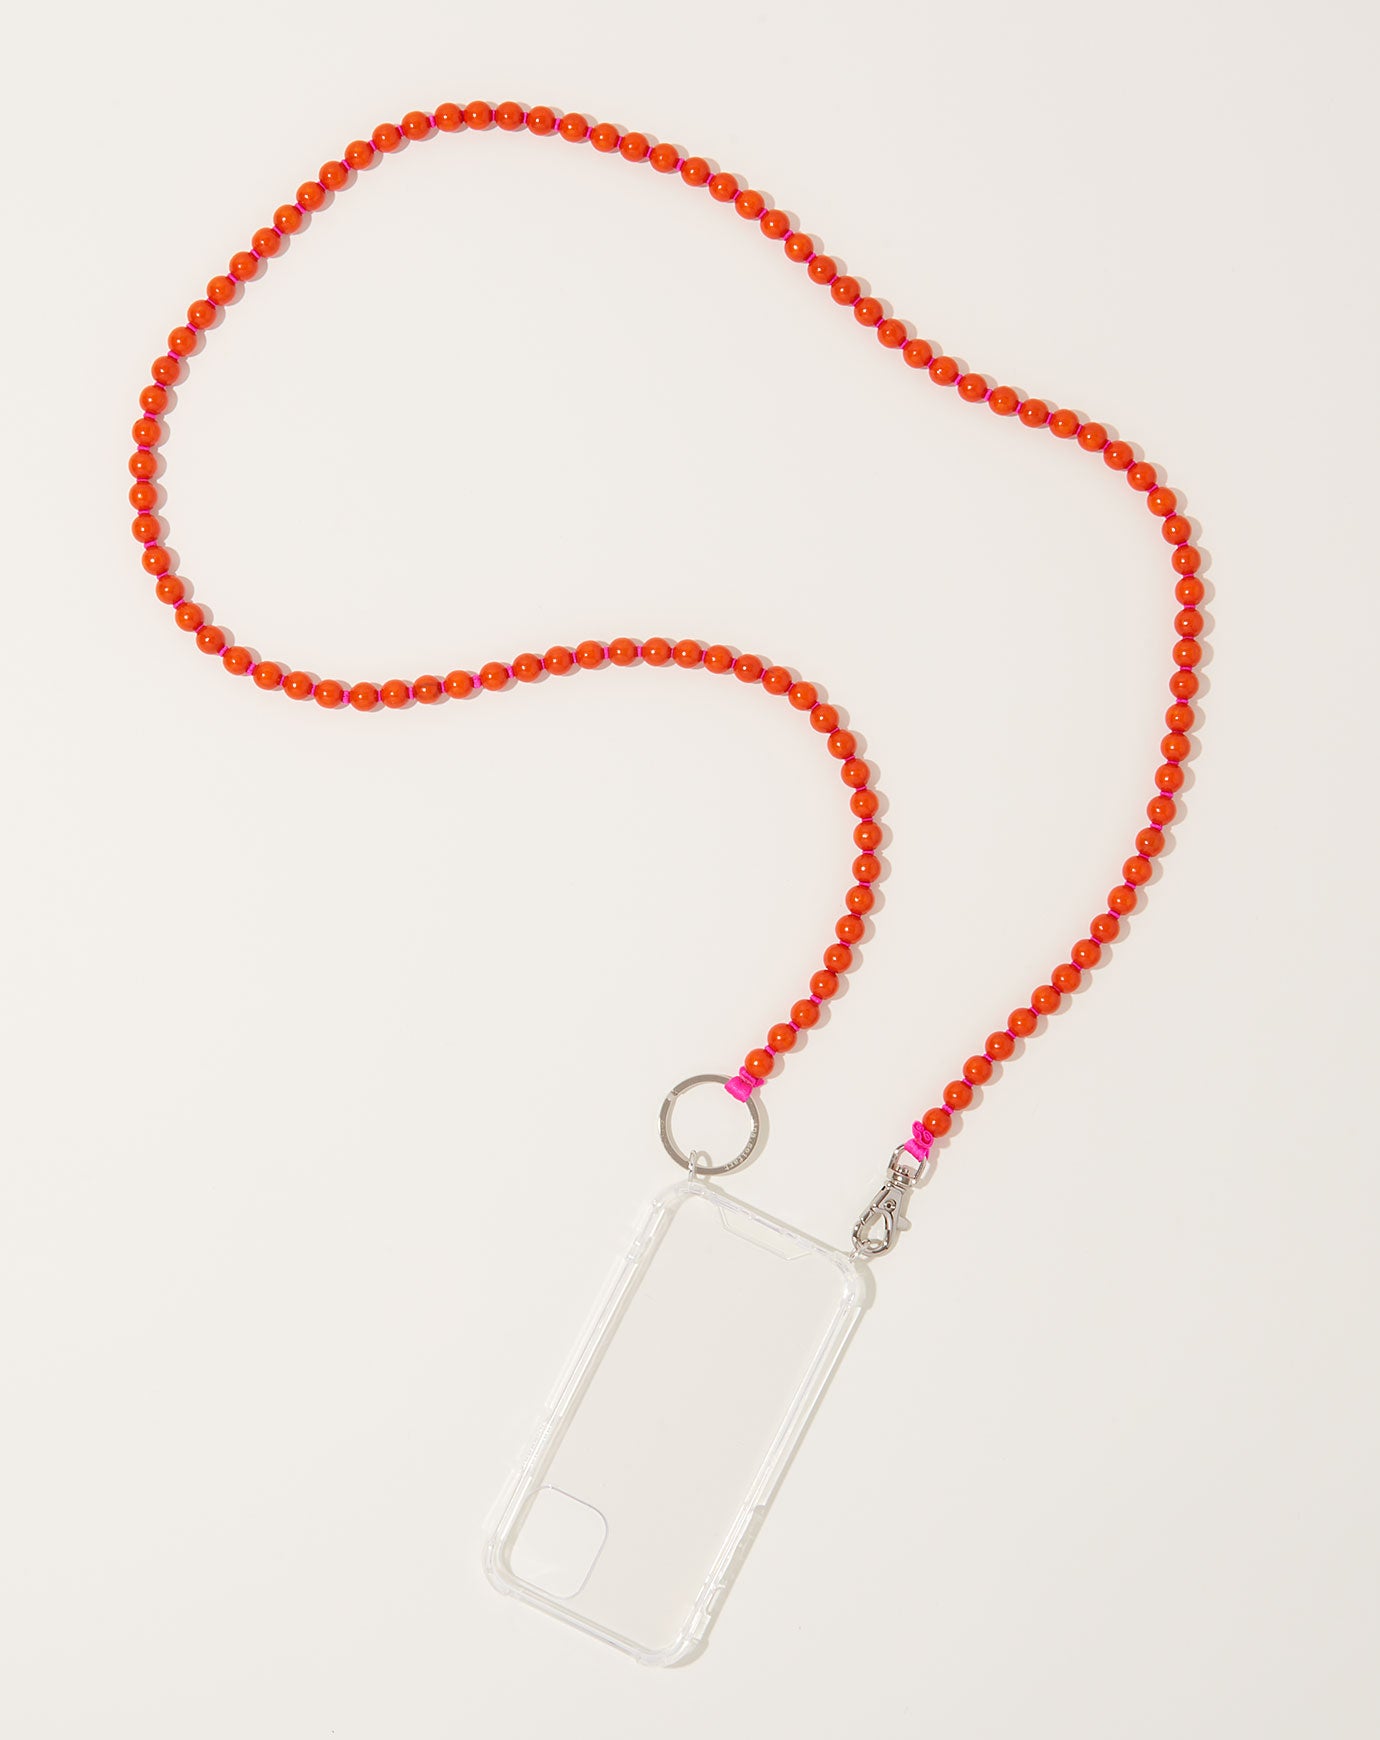 Ina Seifart Handykette iPhone Necklace in Orange on Pink